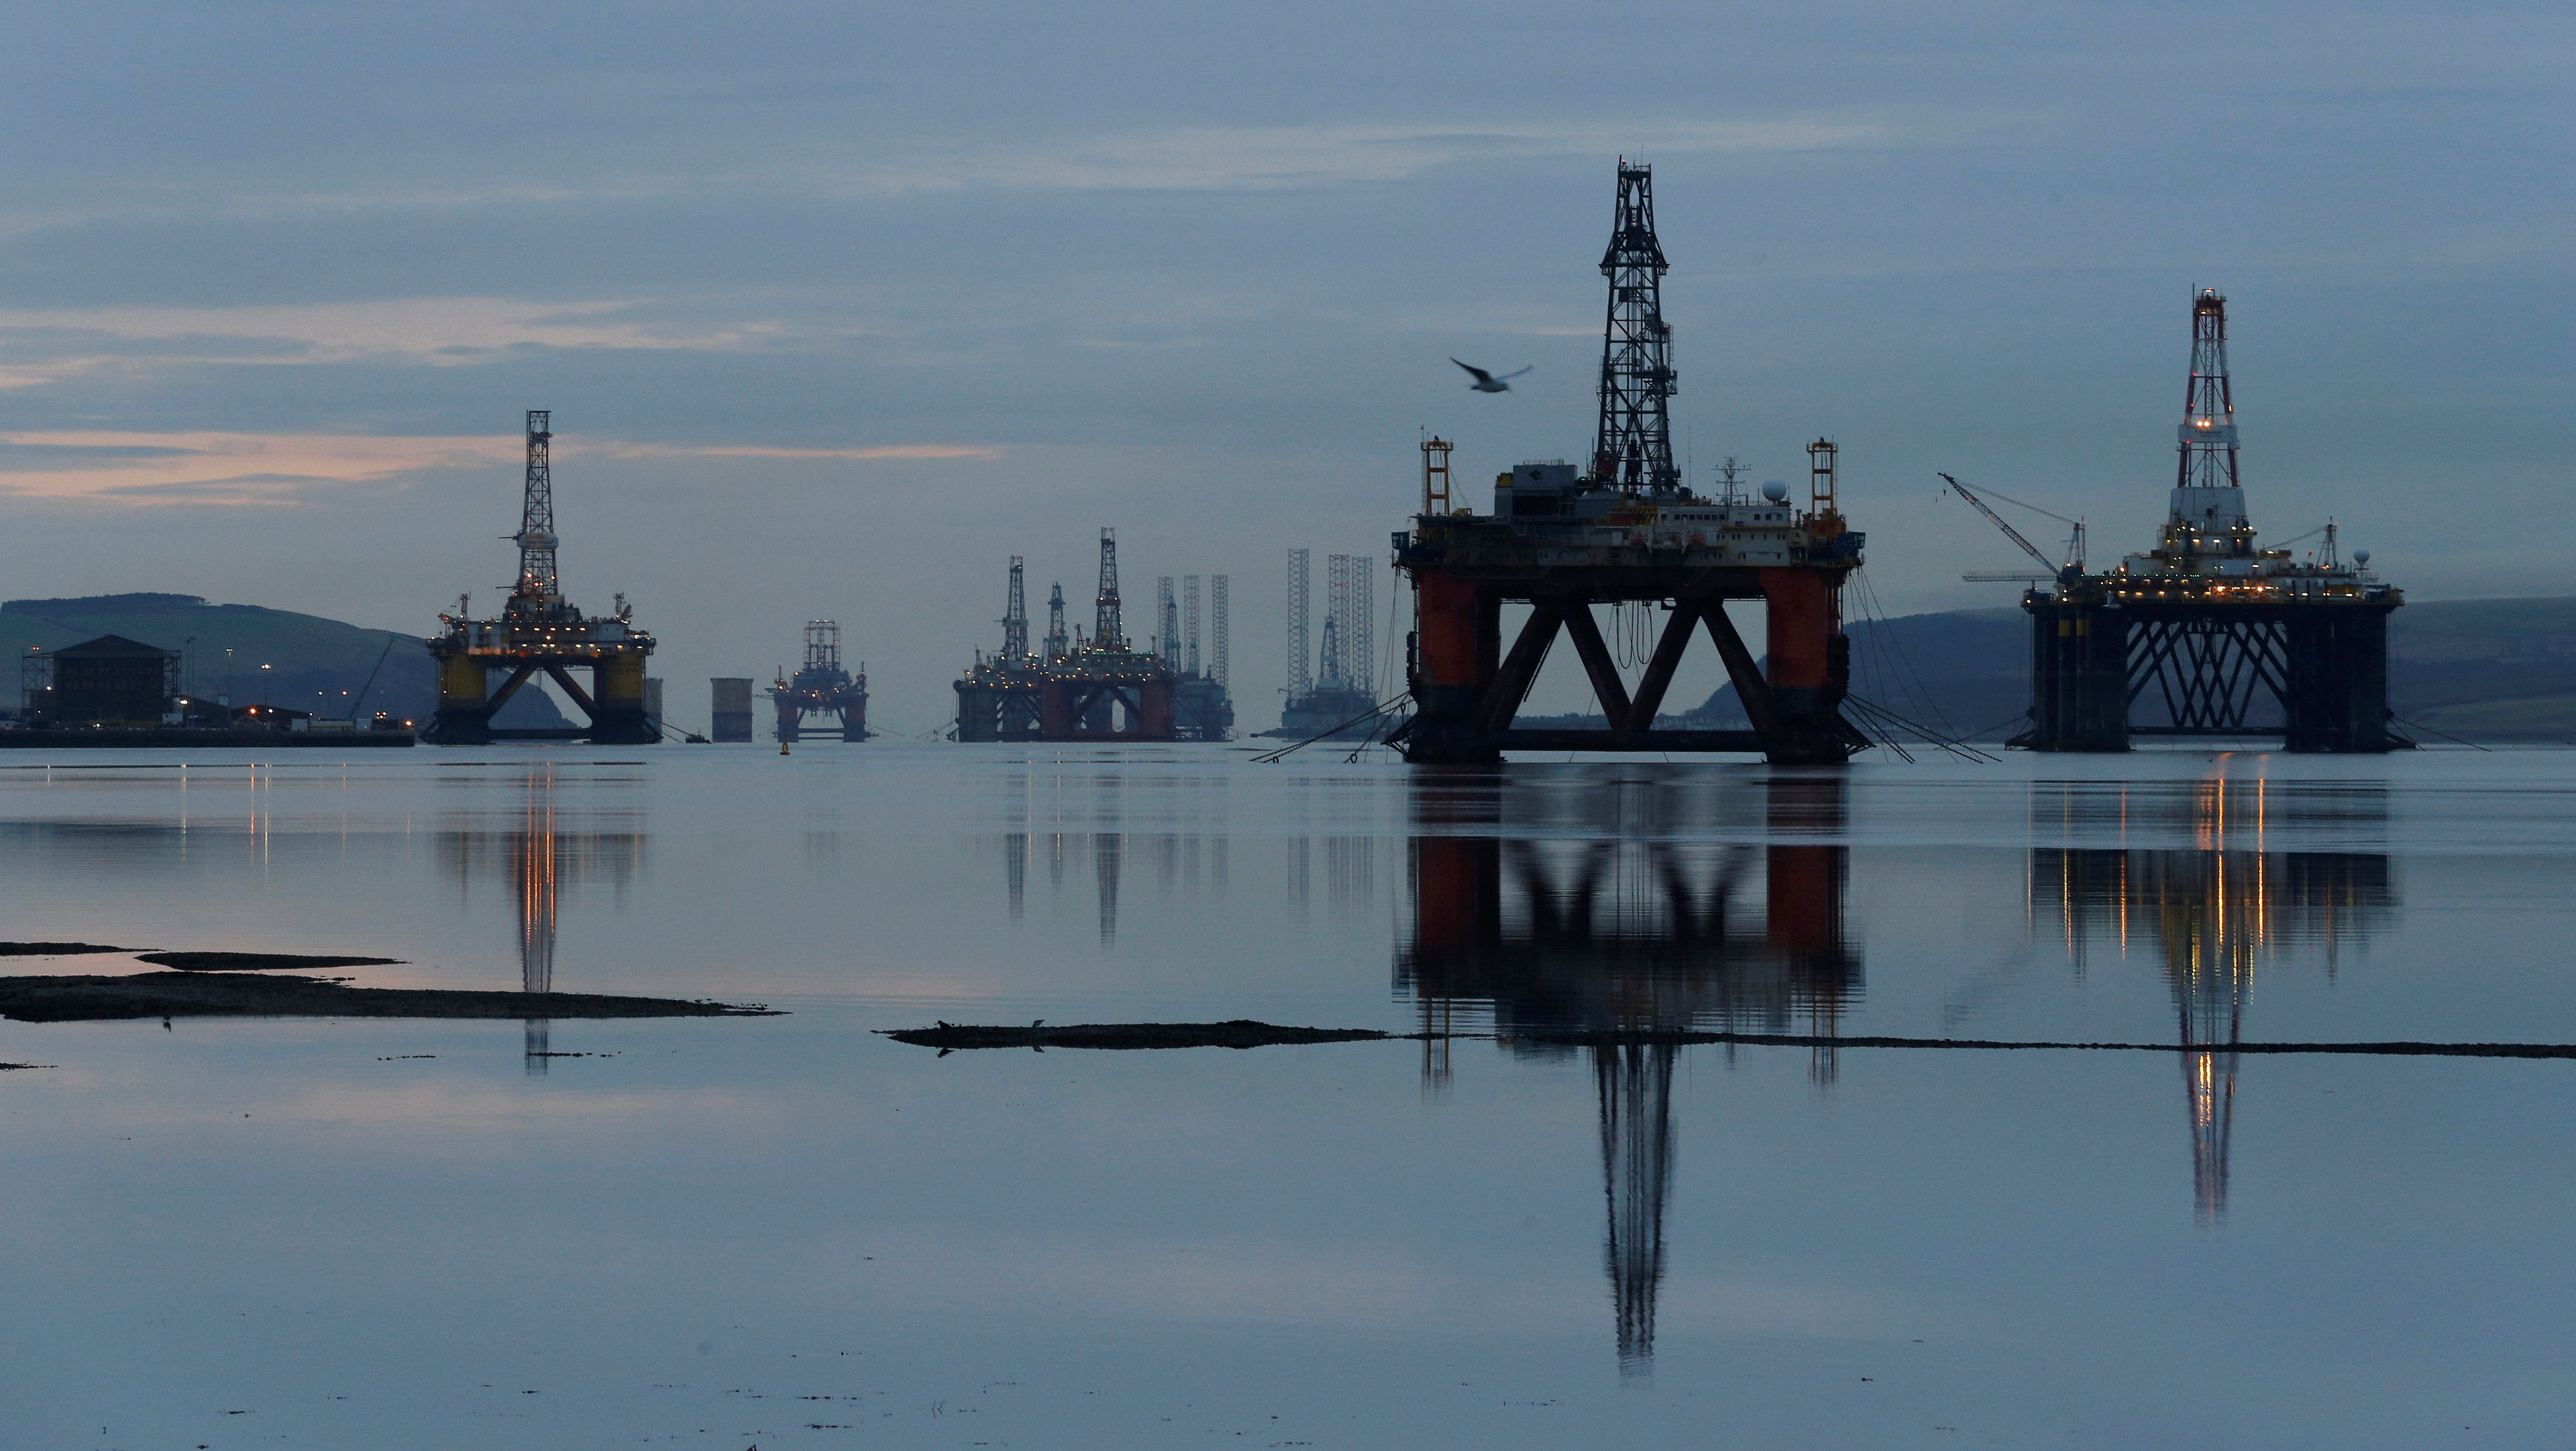 Drilling rigs are parked up in the Cromarty Firth near Invergordon, Scotland